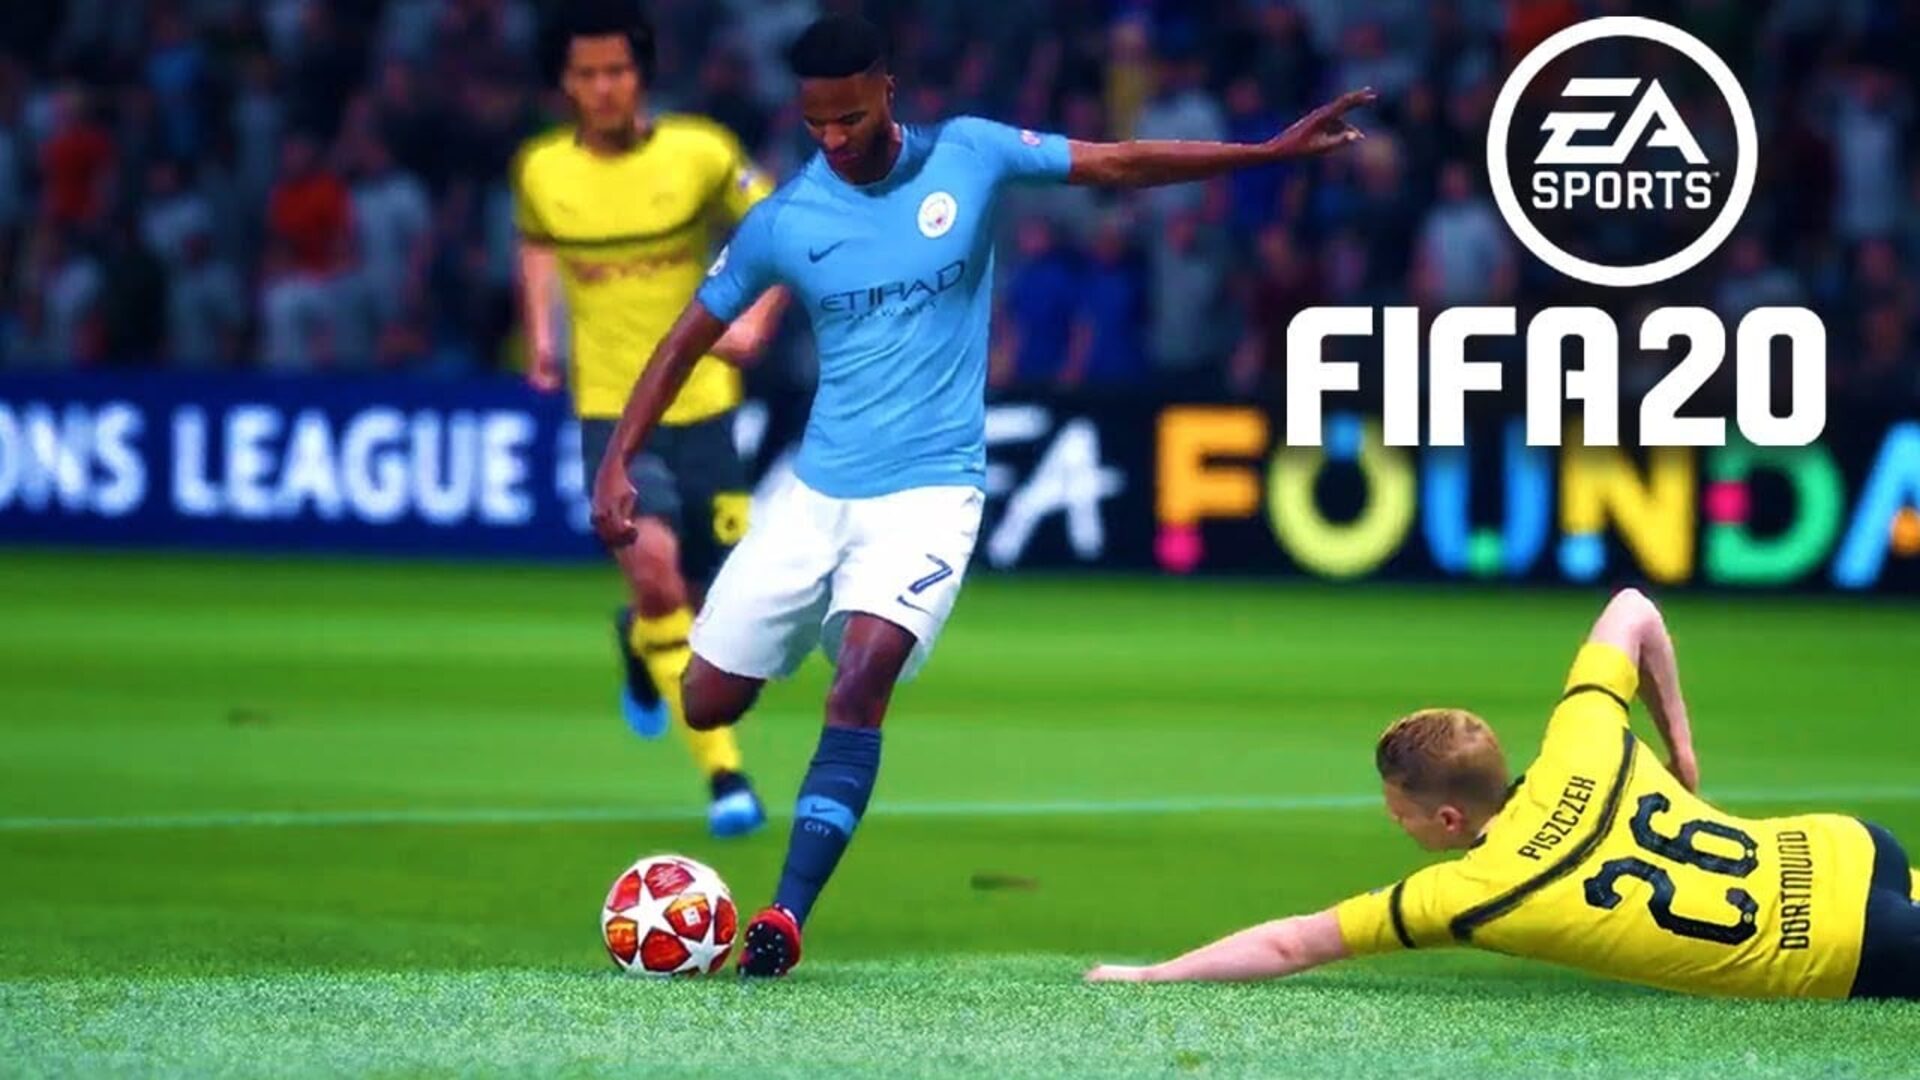 Sterling shooting in fifa20